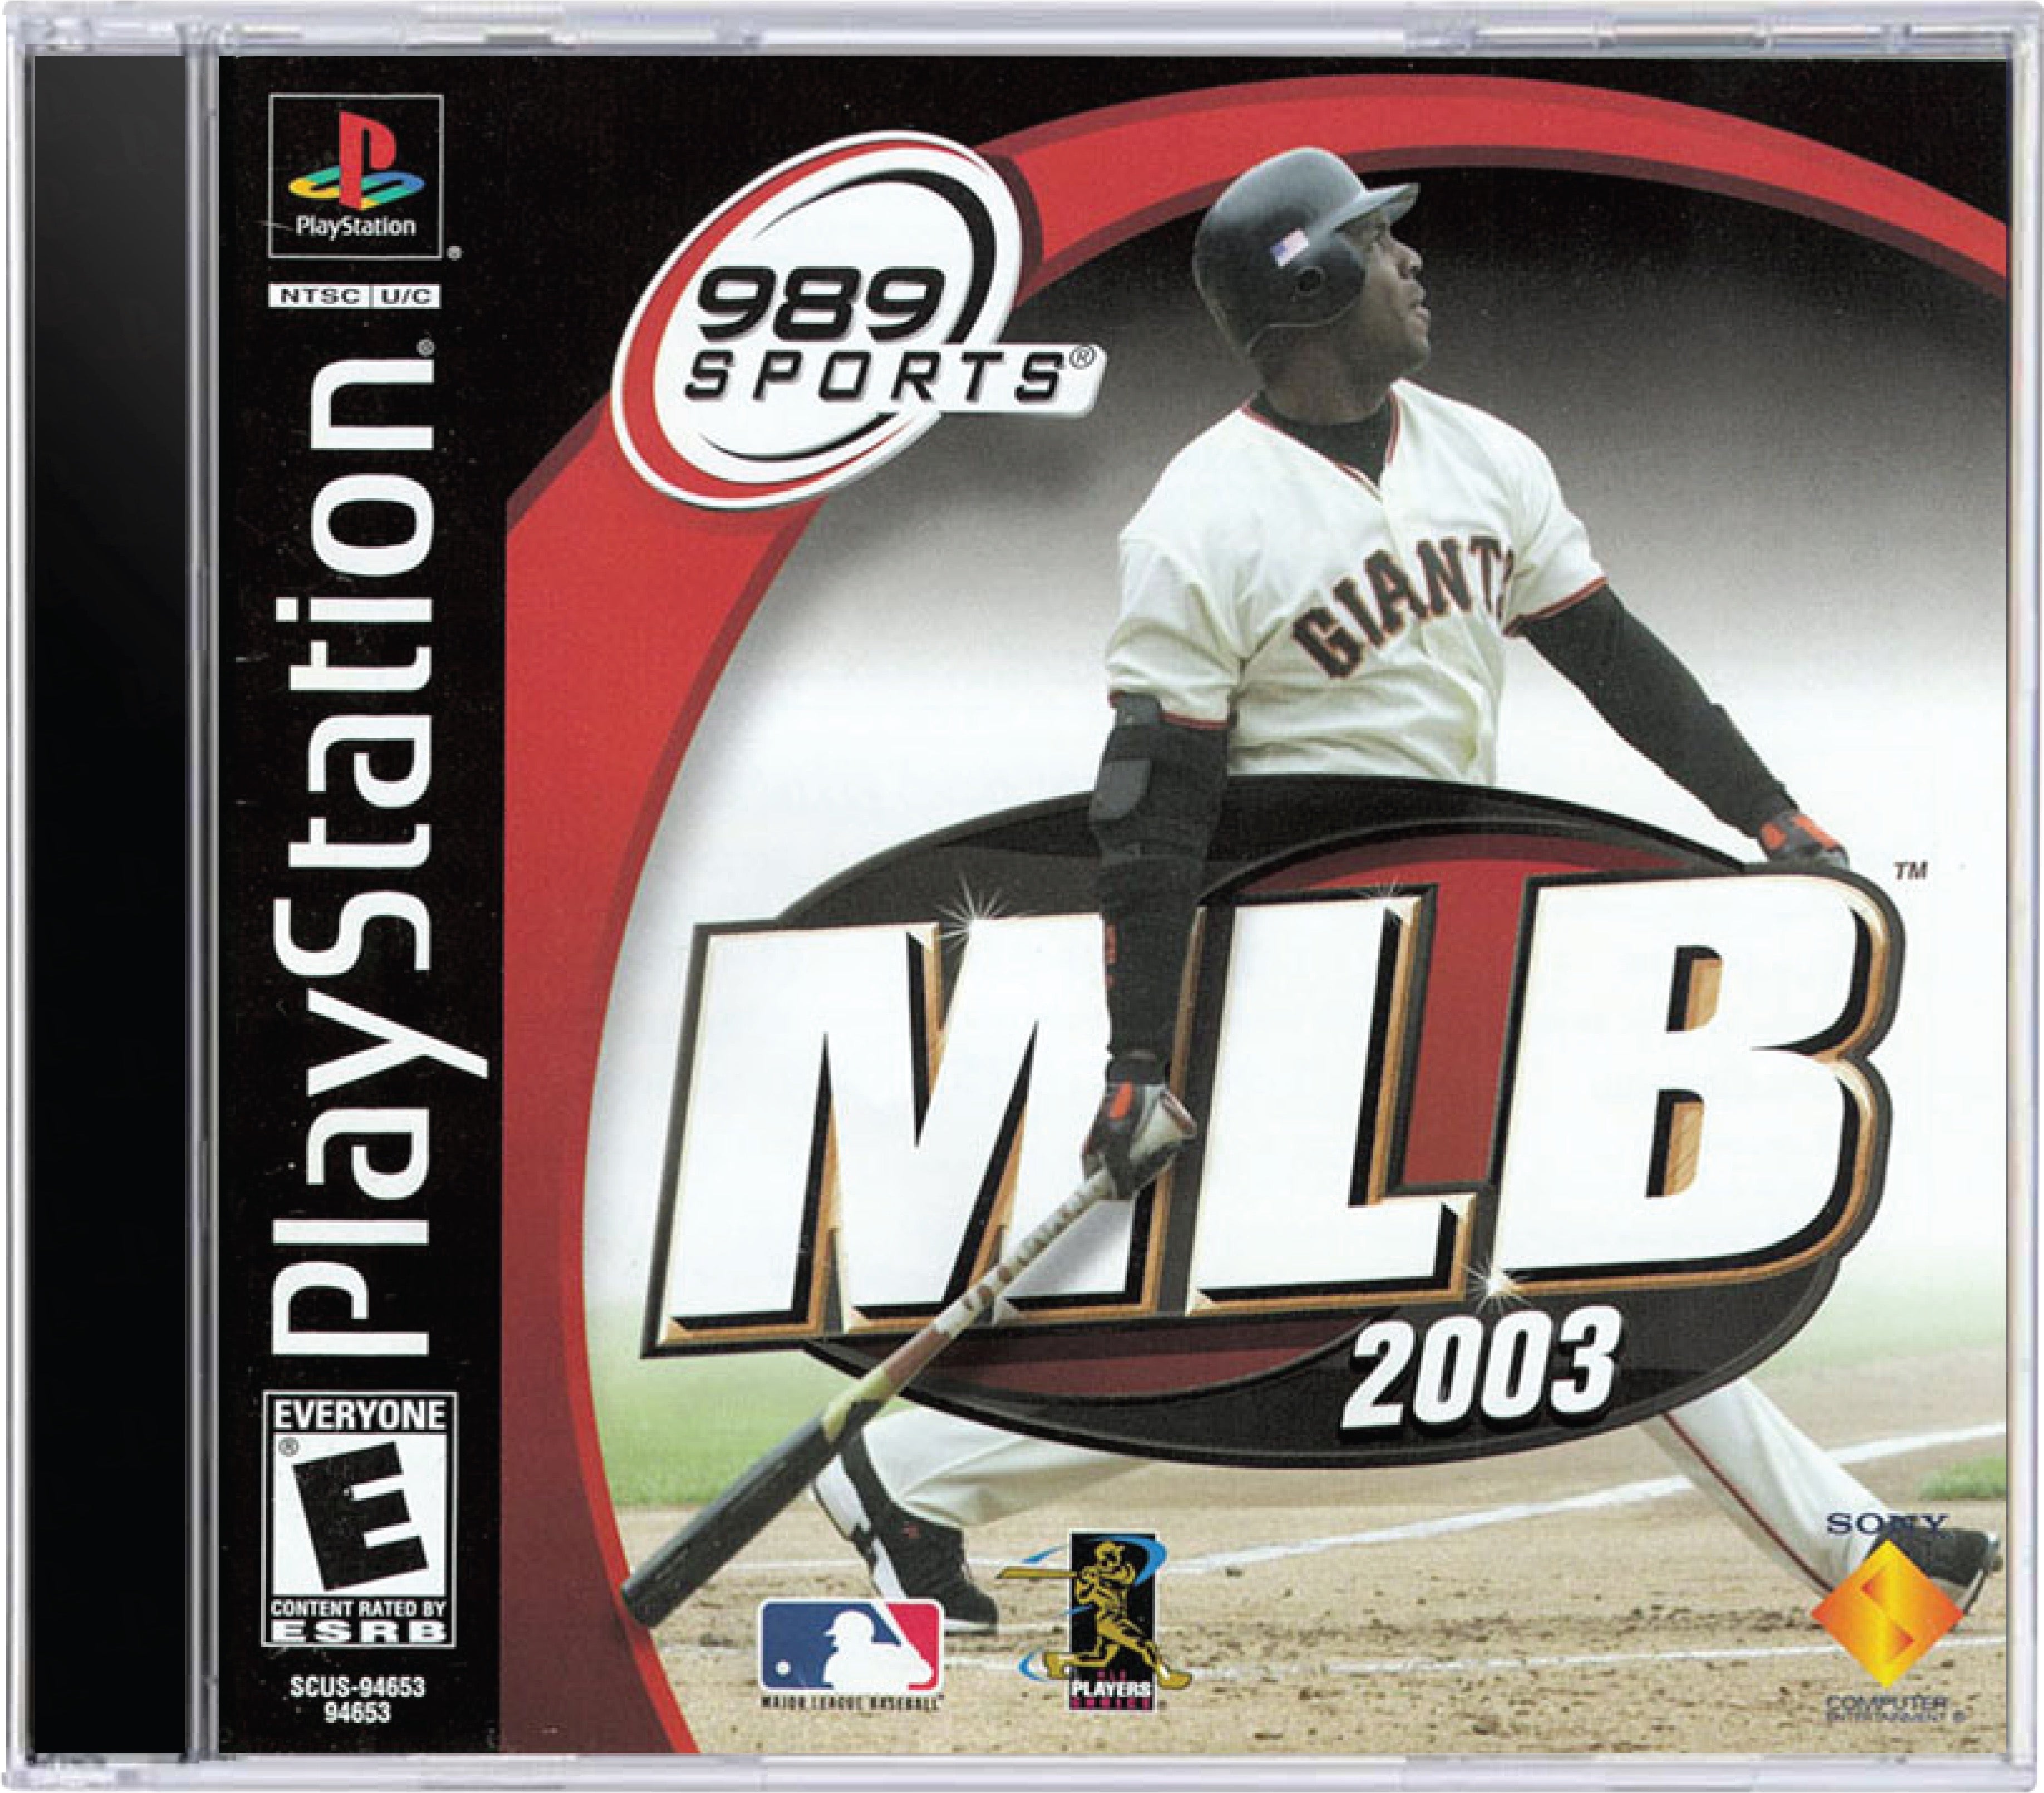 MLB 2003 Cover Art and Product Photo